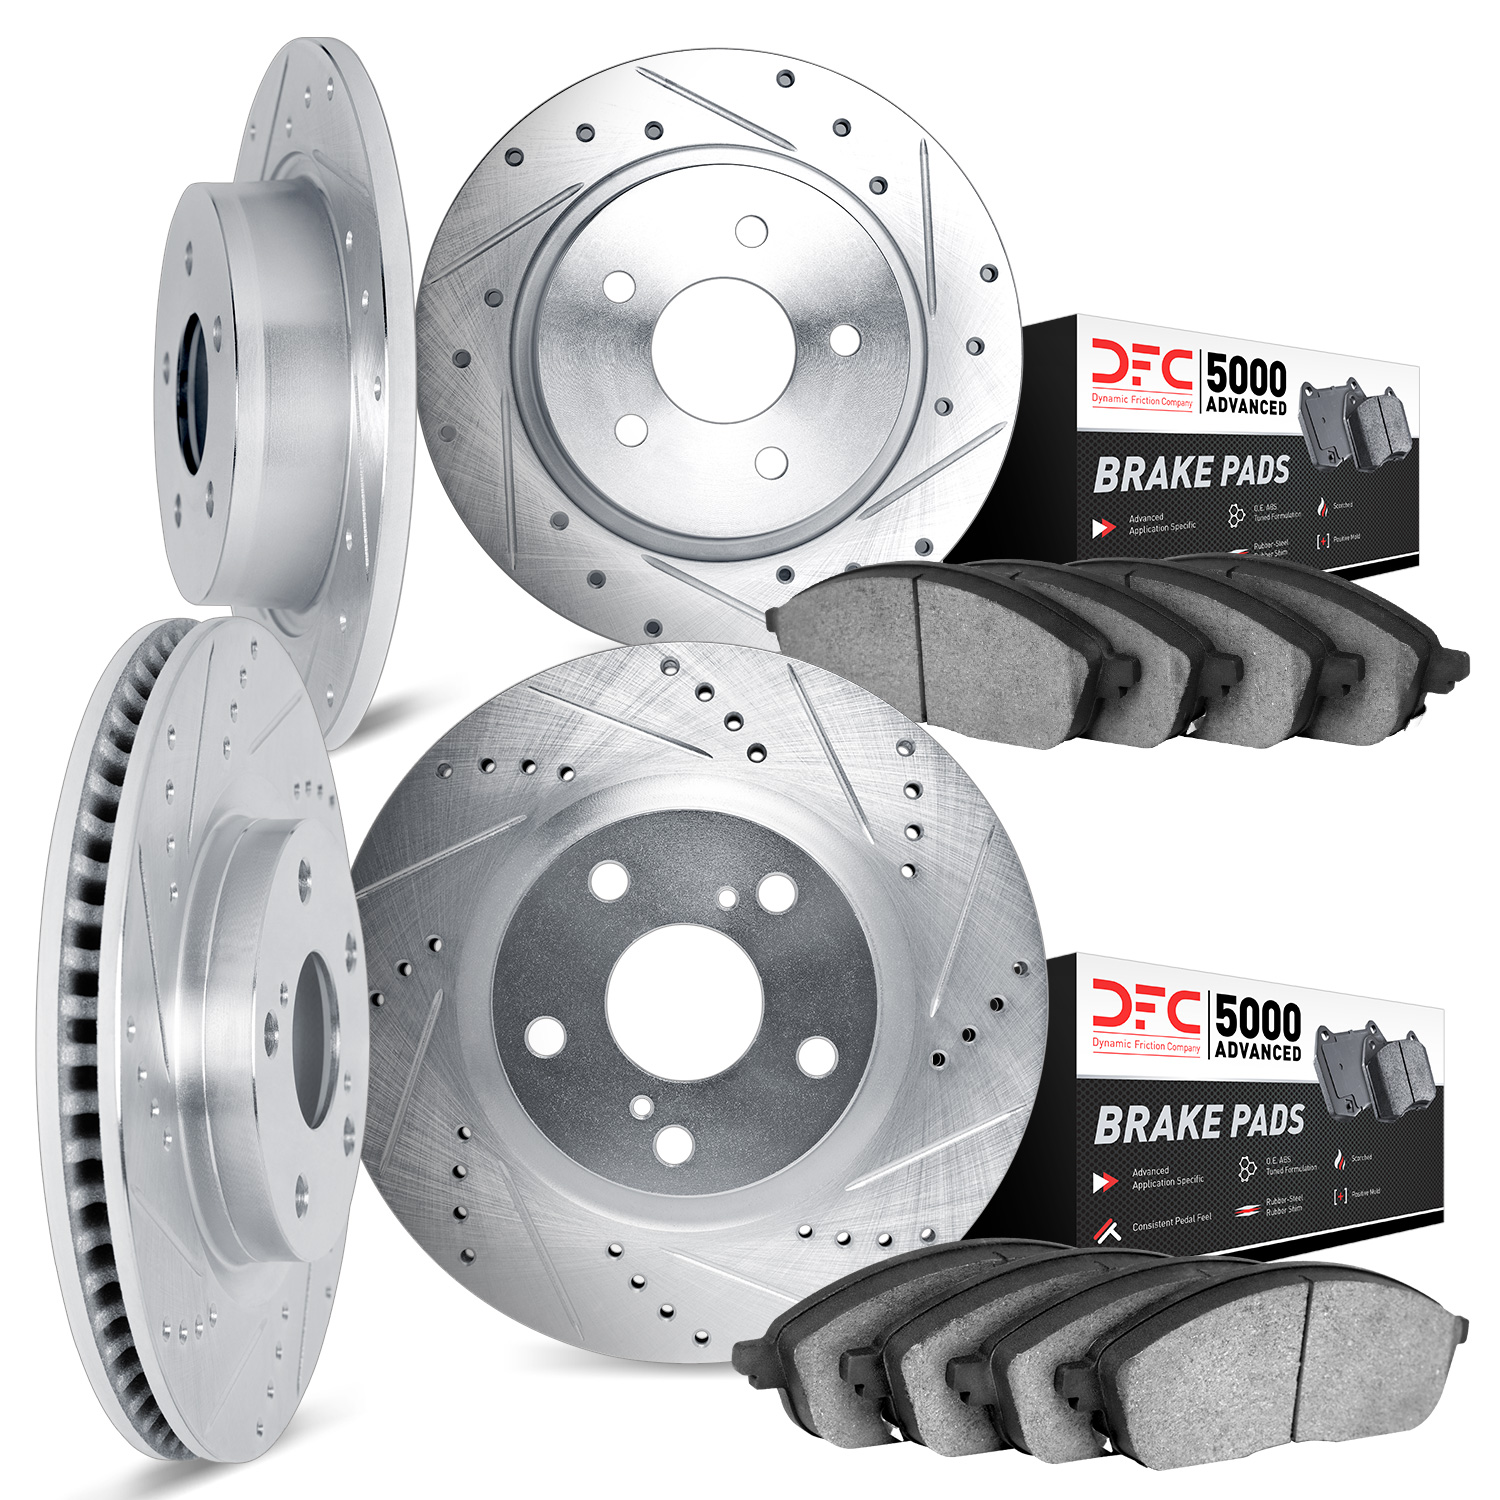 7504-76131 Drilled/Slotted Brake Rotors w/5000 Advanced Brake Pads Kit [Silver], 1992-1996 Lexus/Toyota/Scion, Position: Front a